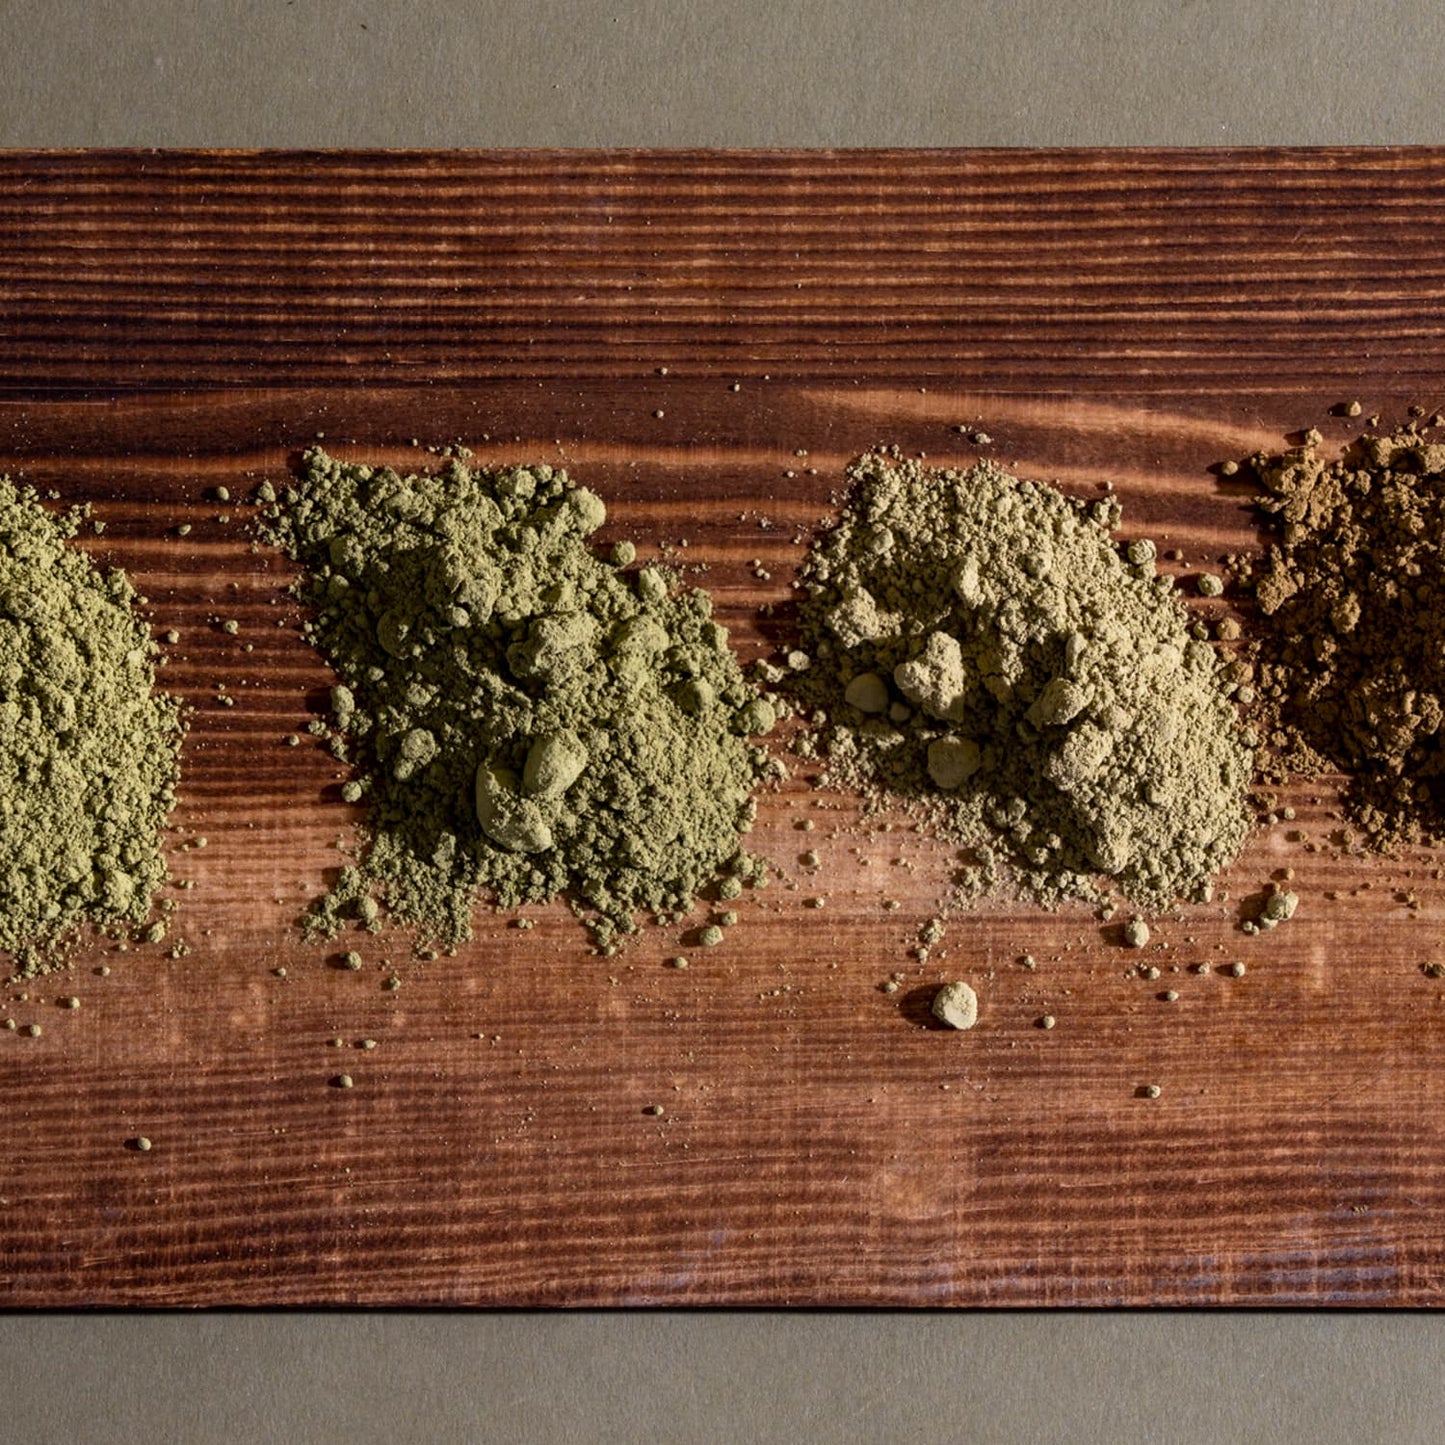 A close-up image of four kratom powder piles on a wooden board